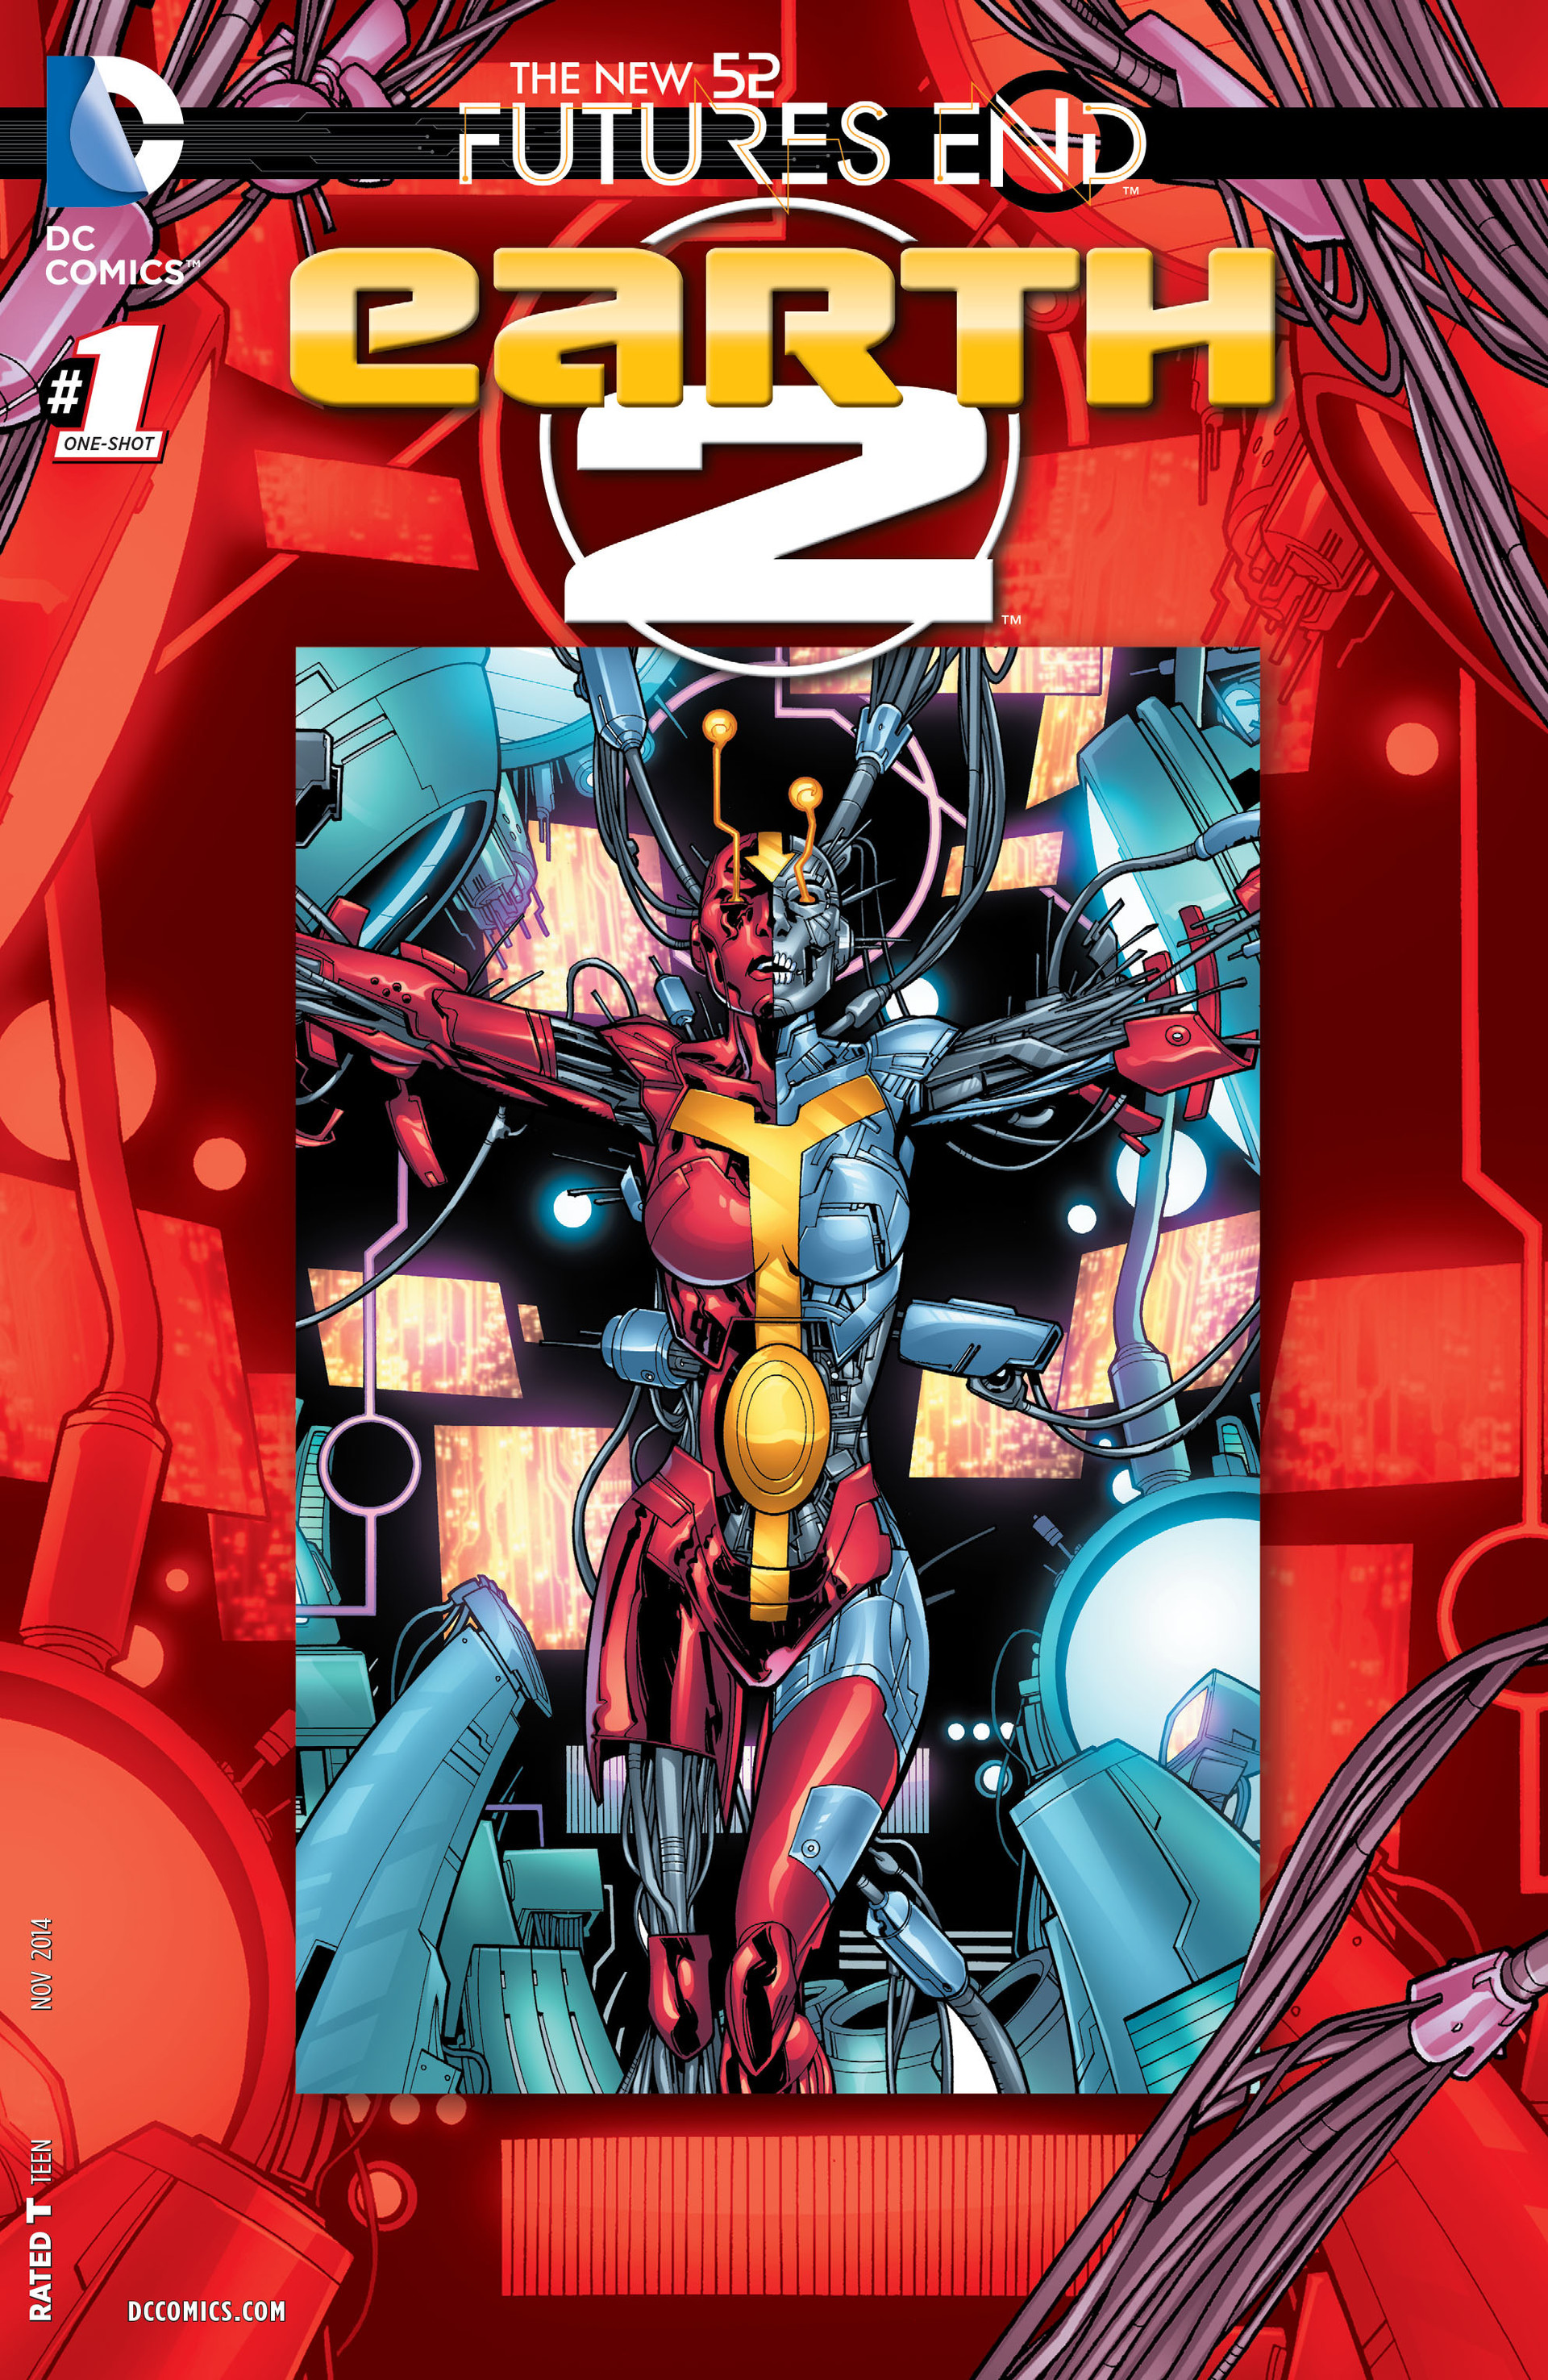 Earth 2 (2012) Futures End One Shot - Used